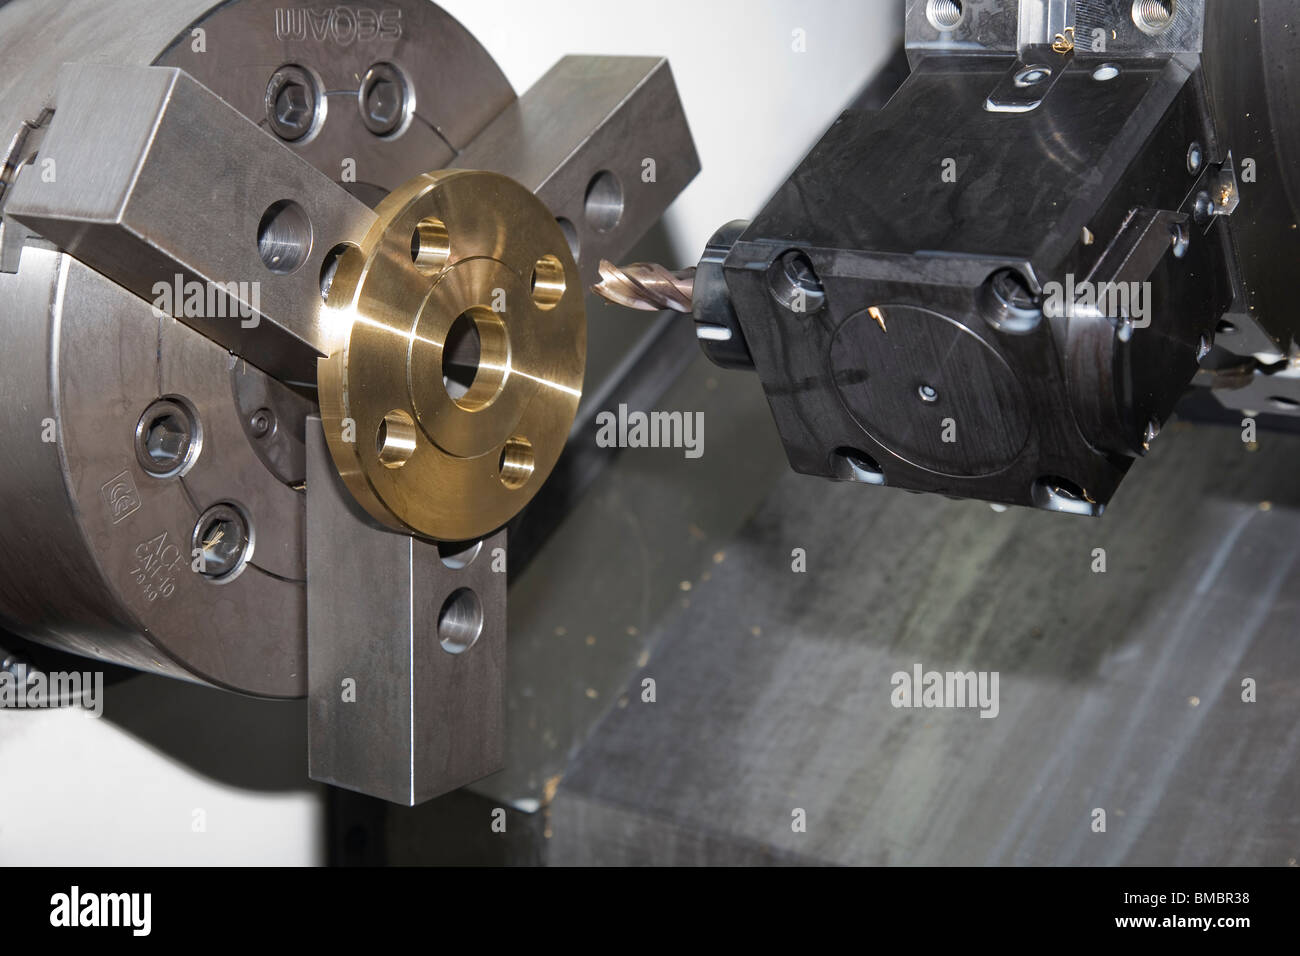 CNC lathe machine with Brass component in jaws of Chuck about to be drilled with live turret drill Stock Photo